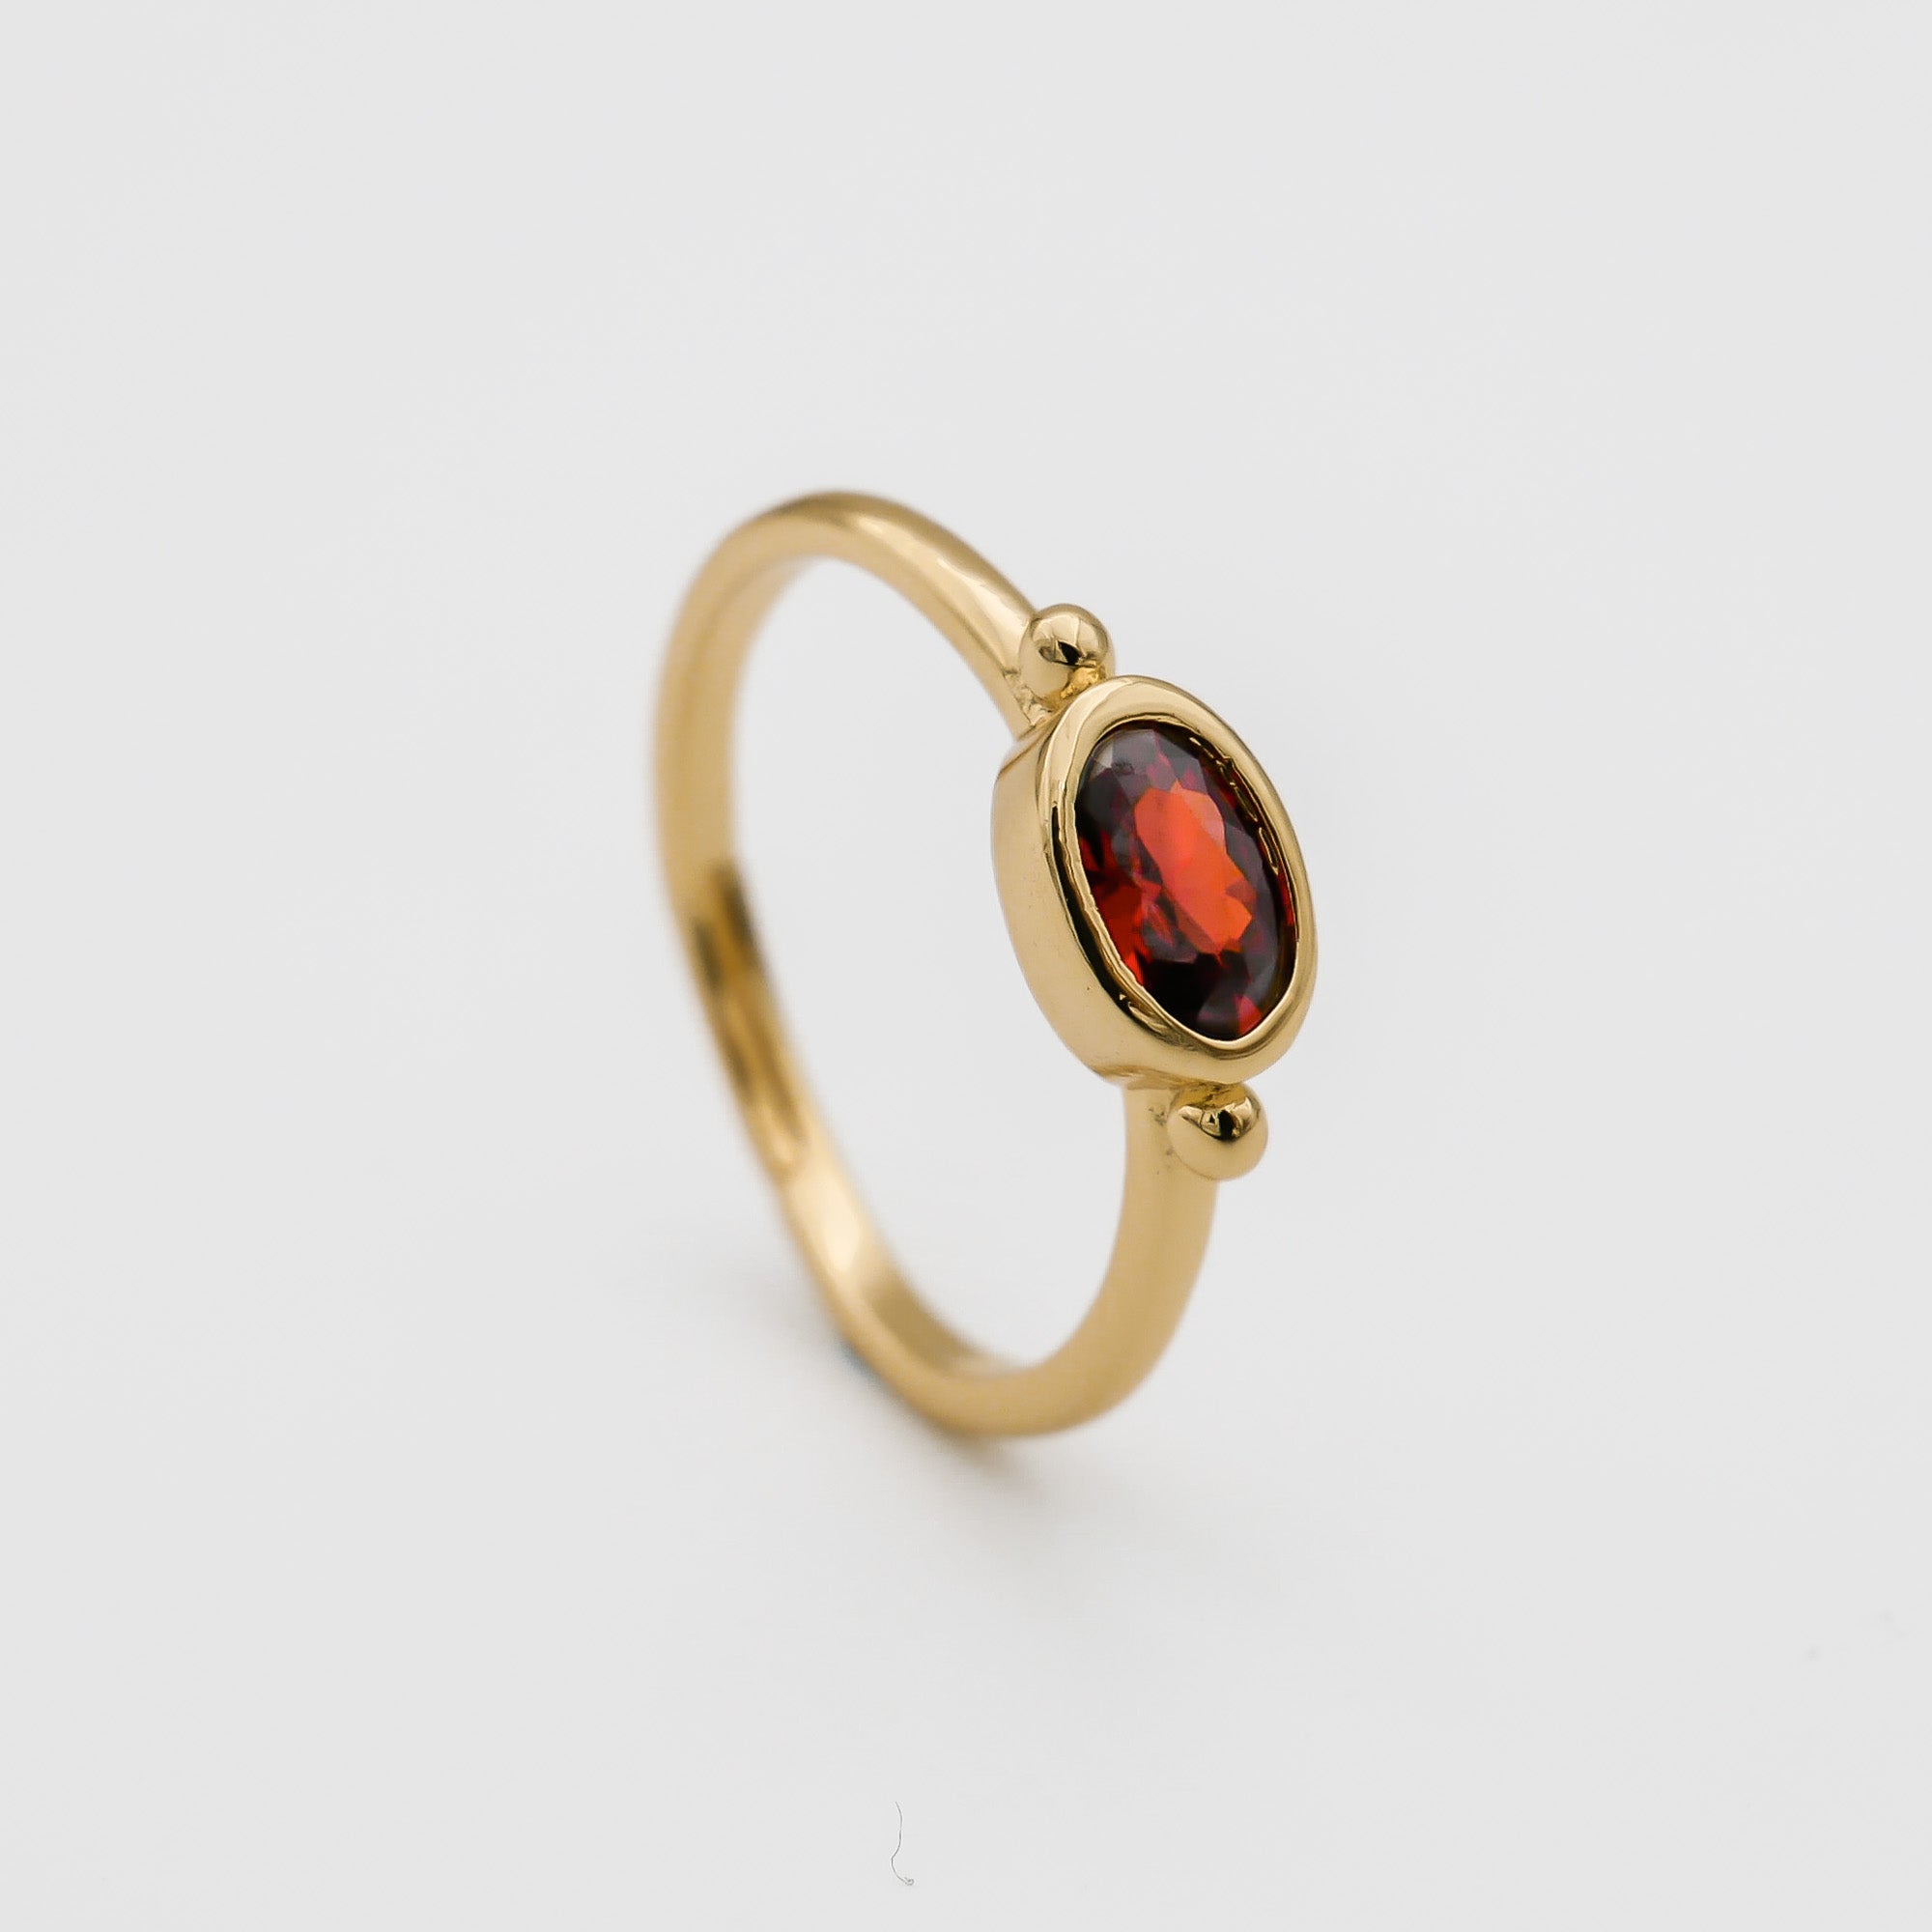 Birthstone ring gold for January with garnet